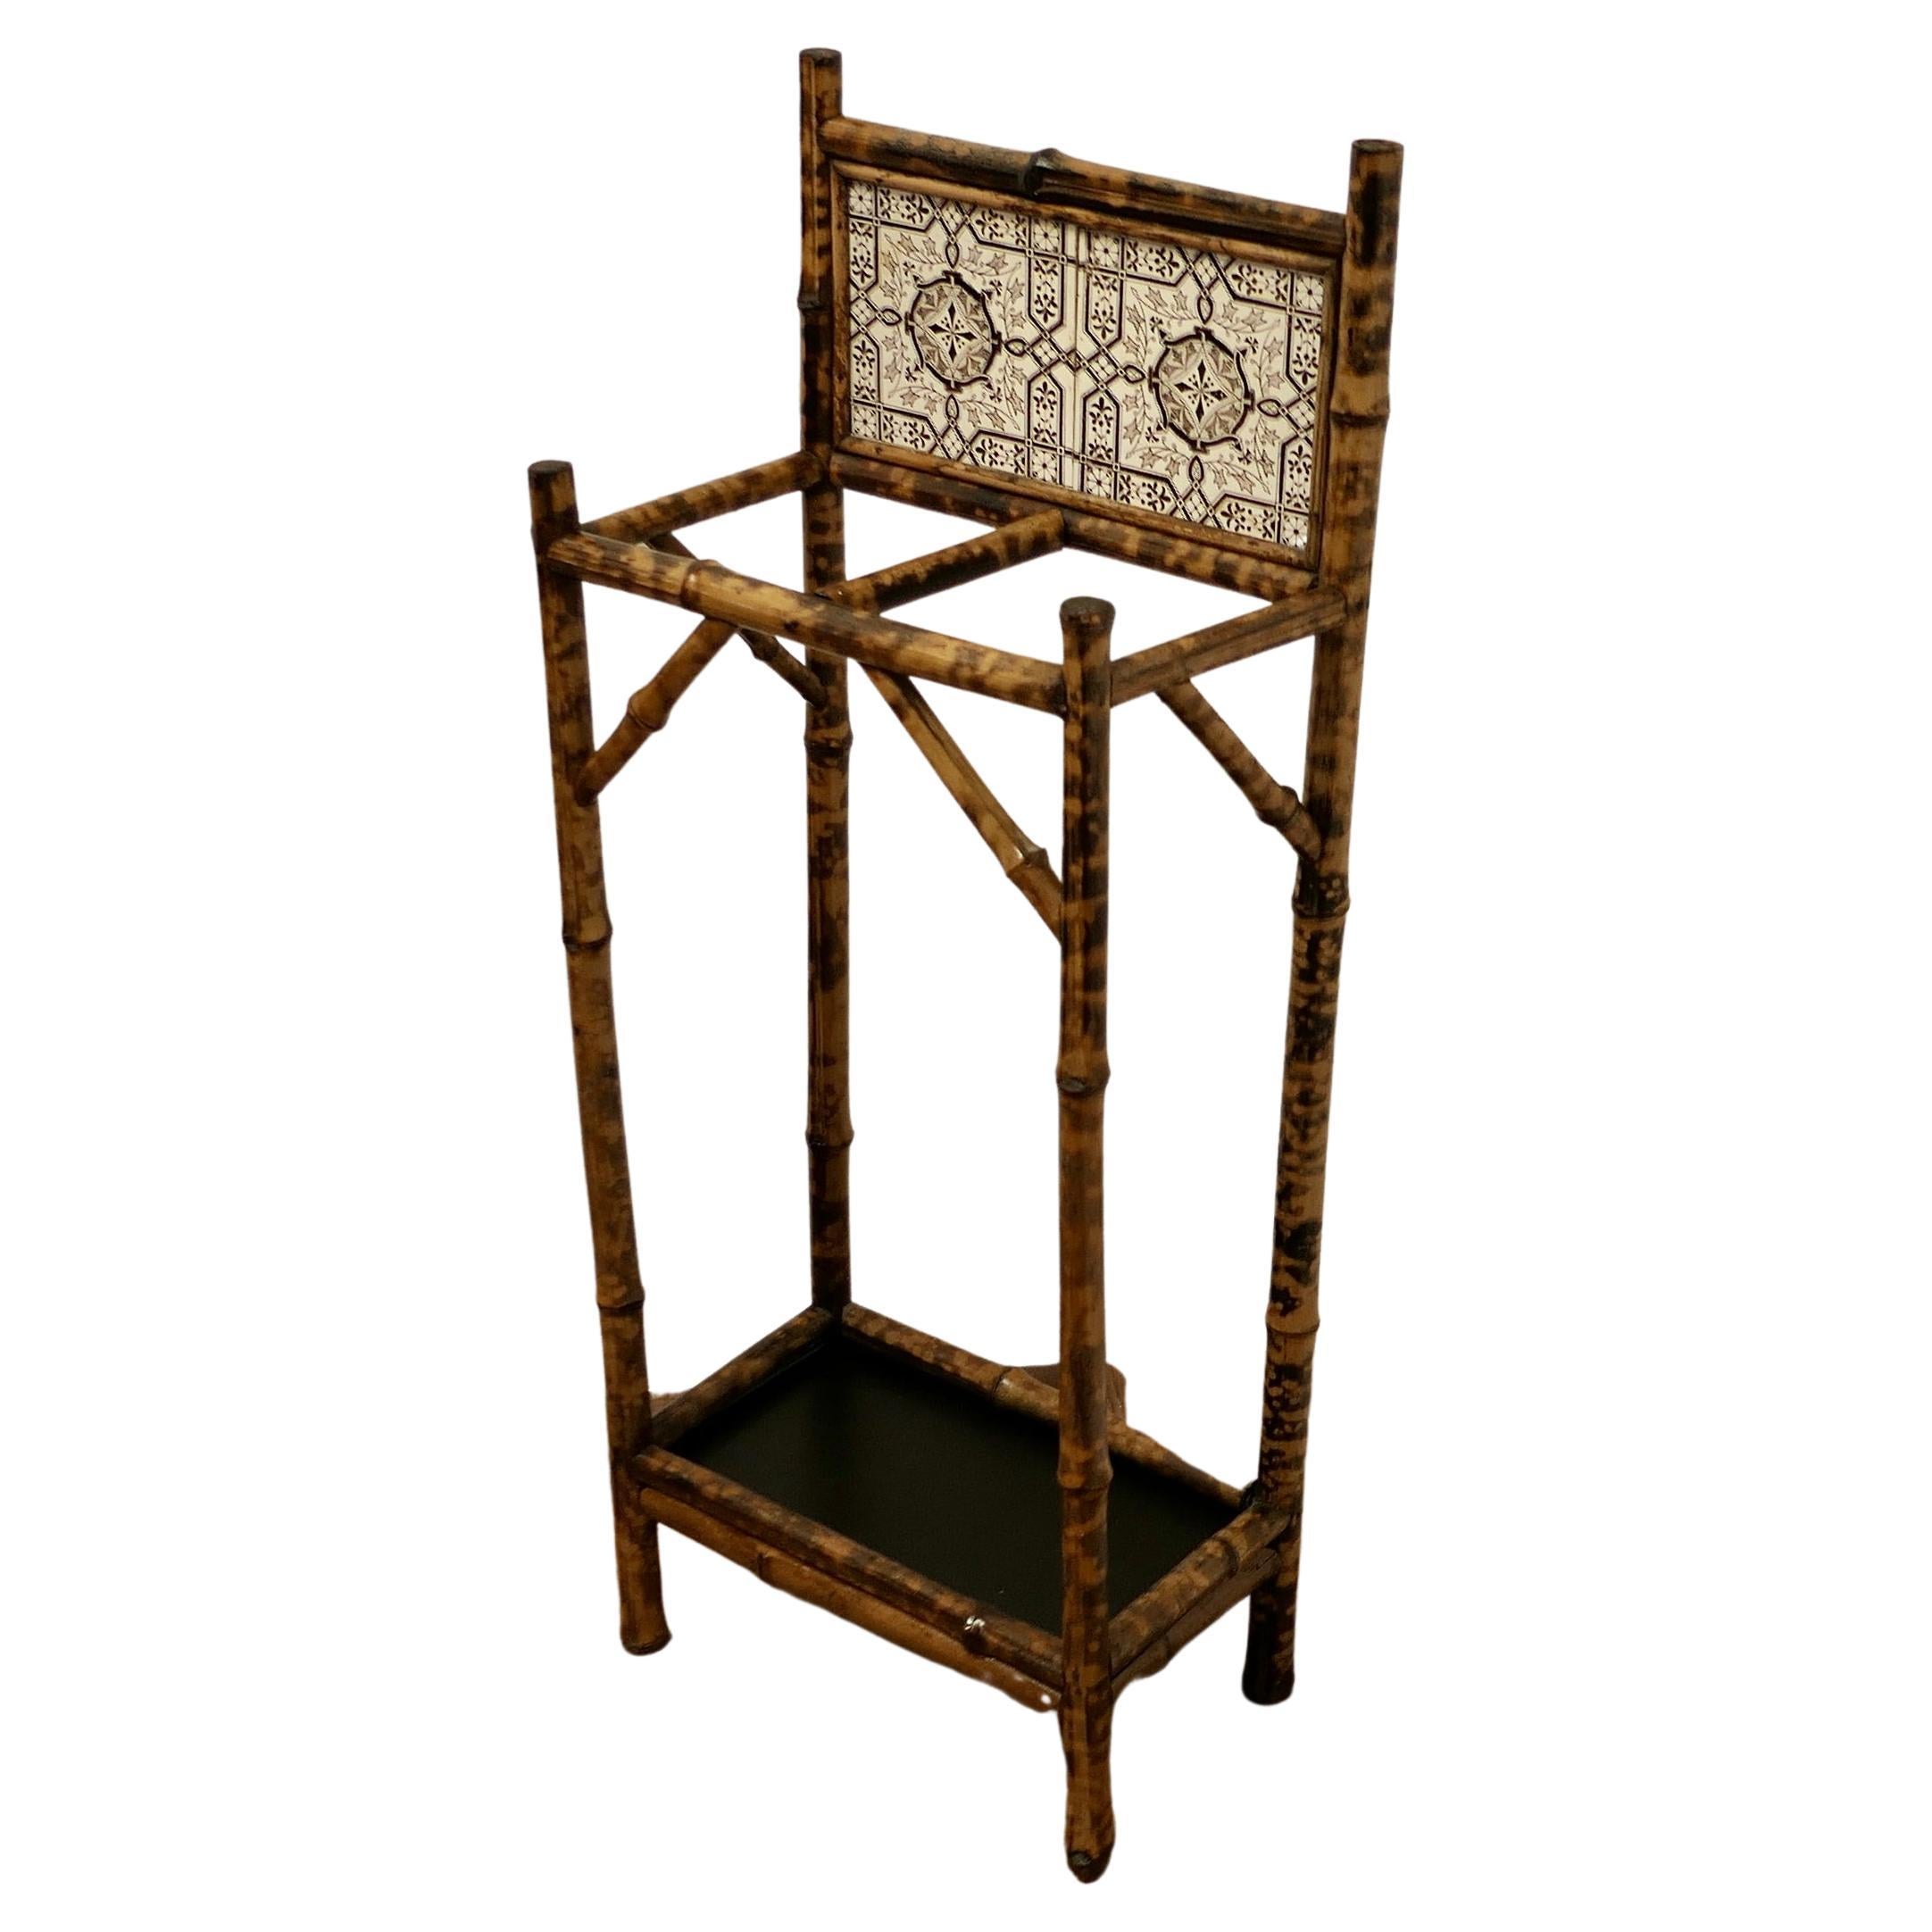 Victorian Bamboo and Tiled Stick and Umbrella Stand a Charming Little Piece